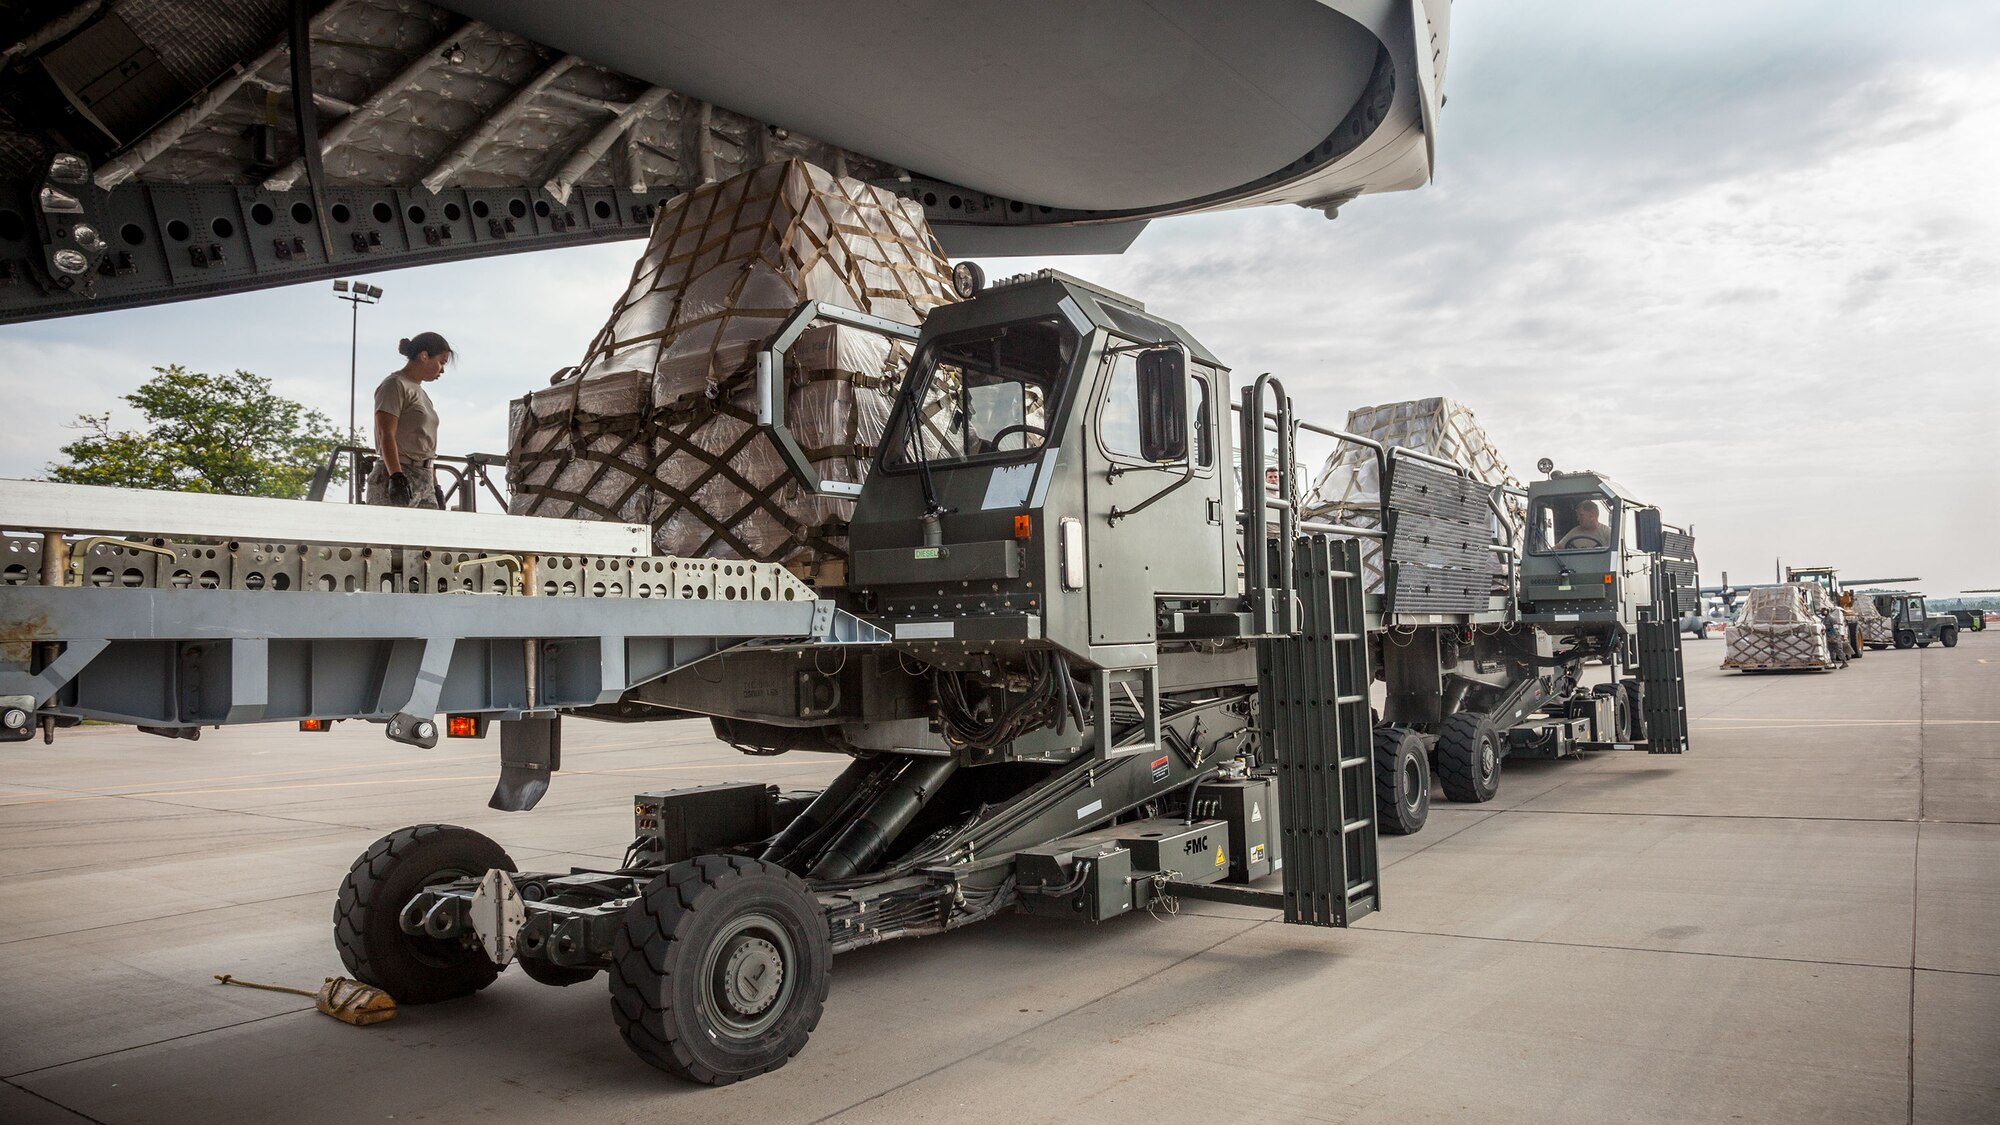 Airmen from the 27th Aerial Port Squadron load humanitarian aid pallets onto a C-17 Saturday morning at the Minneapolis-St. Paul Air Reserve Station, Minn.  The over 90,000 lbs of food from relief organization Food For Kidz will be sent to Kabul, Afghanistan, utilizing the Denton Program which allows donors to put humanitarian supplies aboard U.S. military transport on a space-available basis.  (U.S. Air Force photo/Shannon McKay)